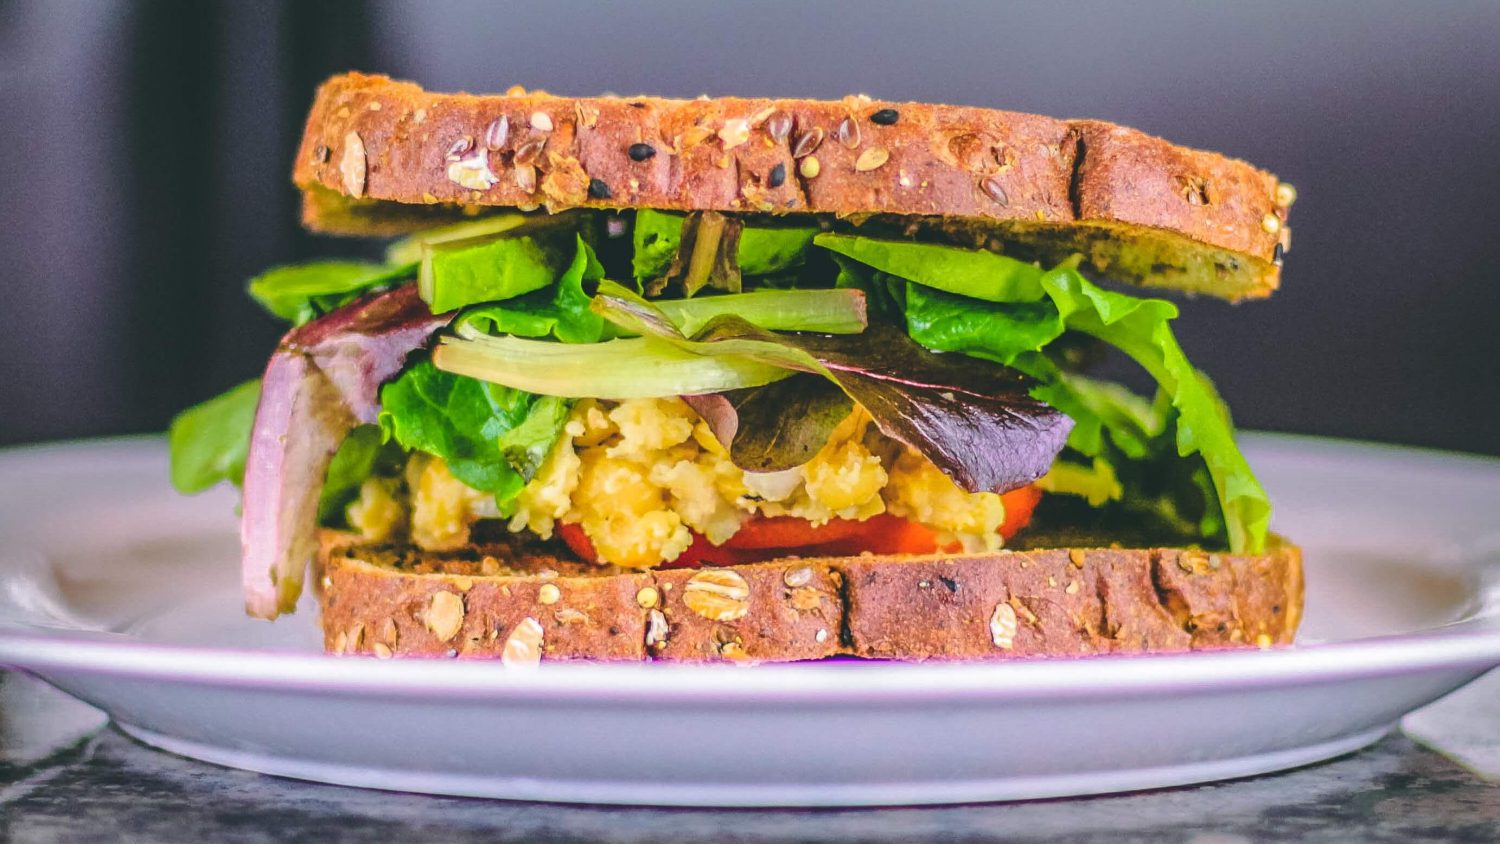 Now You Can Have Vegan Salad and Chickpea Protein All-In-One